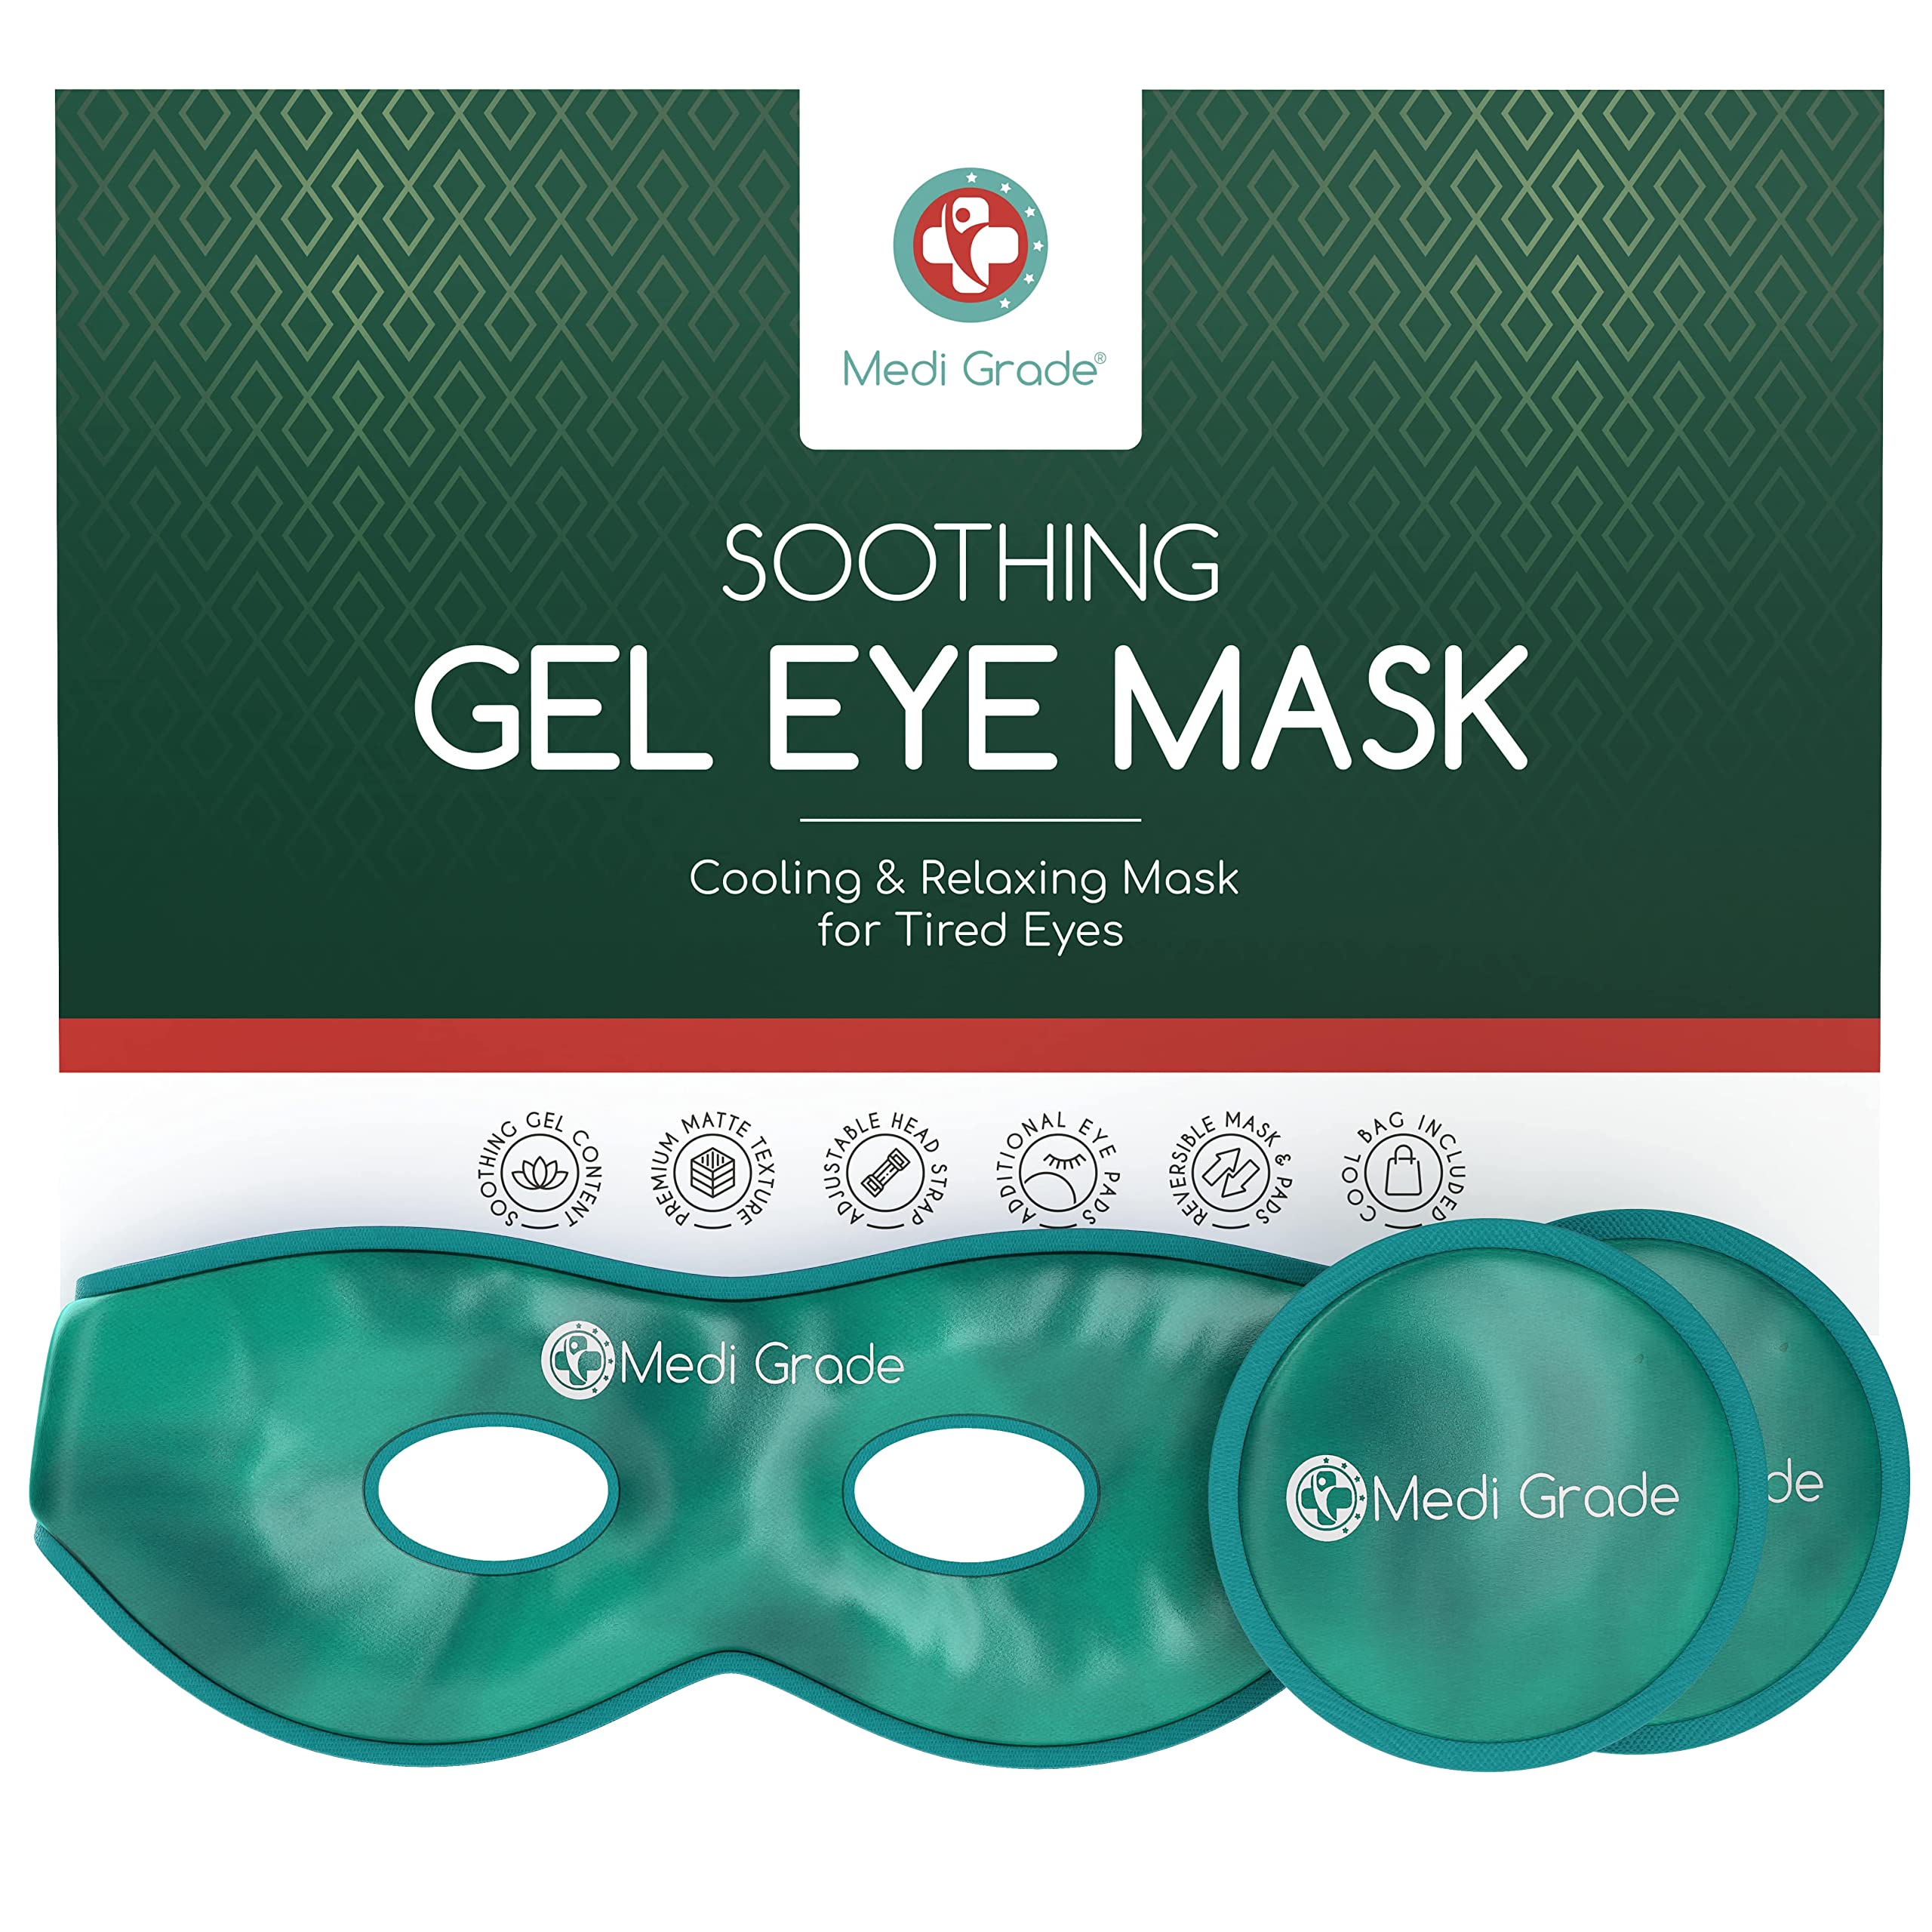 Medi Grade Cooling Eye Mask - Reusable Gel Eye Mask with 2 x Cooling Eye Pads and Cooling Storage Bag - Enjoy Relaxation at Home or On The Go with Our Reversible Eye Compress with Adjustable Straps